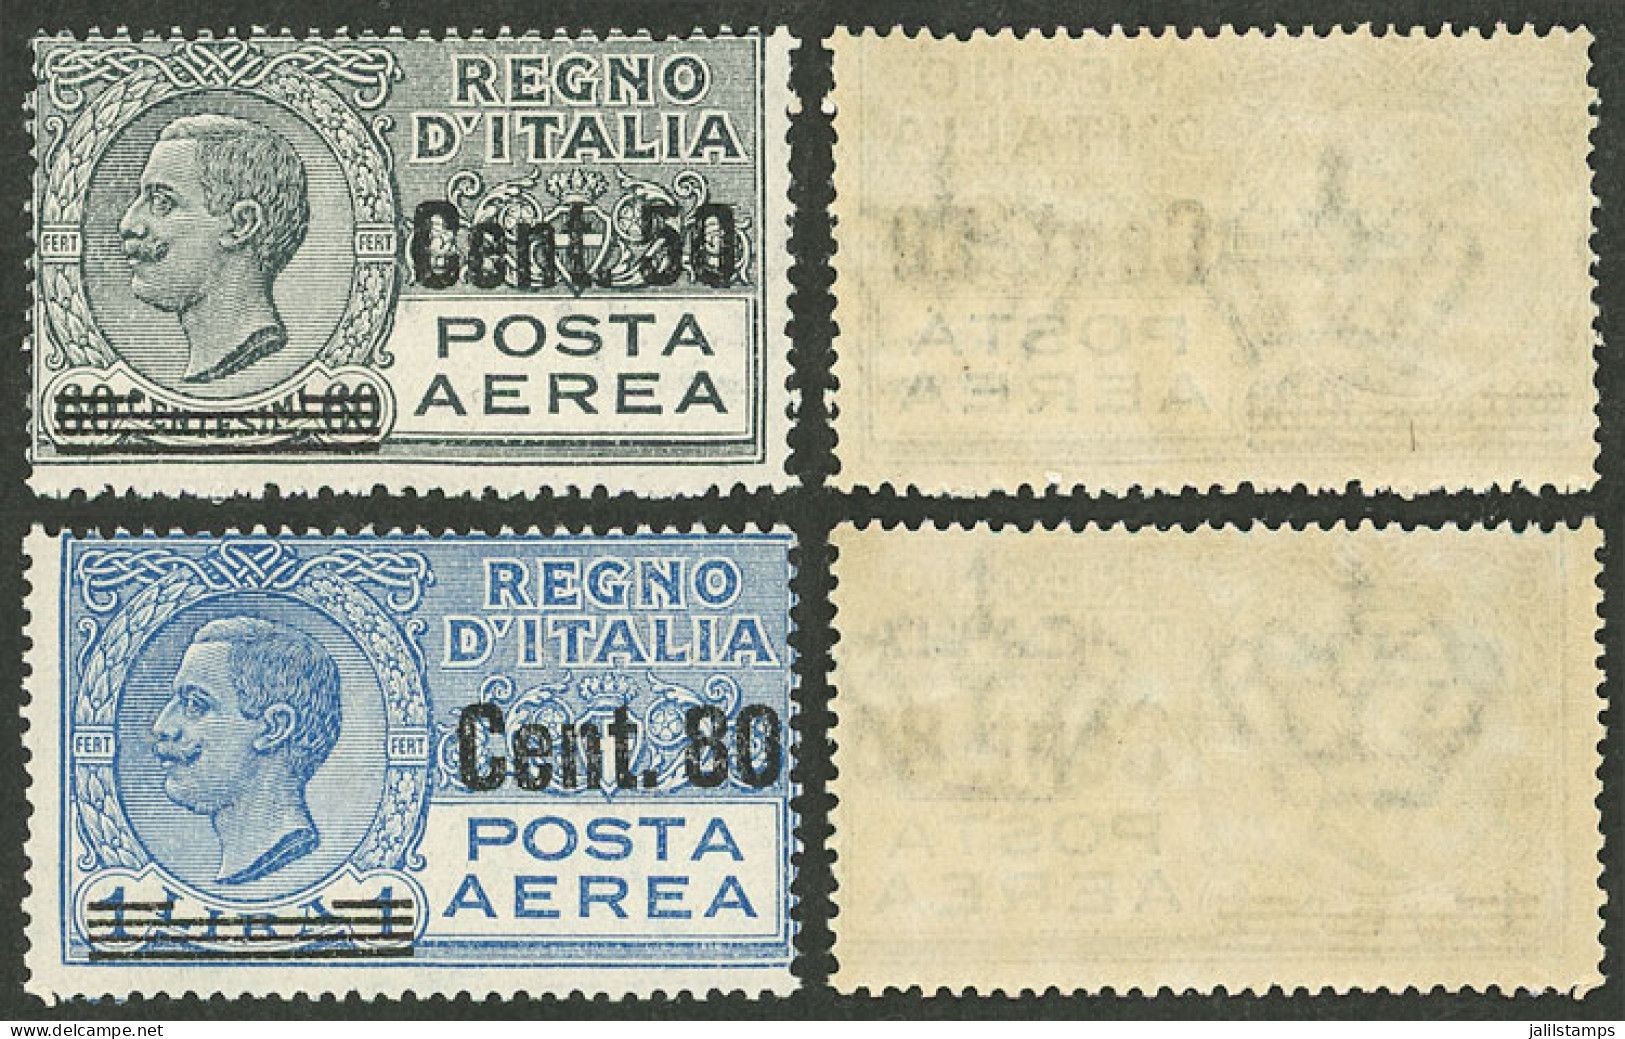 ITALY: Yvert 10/11, 1927 Set Of 2 Overprinted Values, MNH, Excellent Quality! - Unclassified